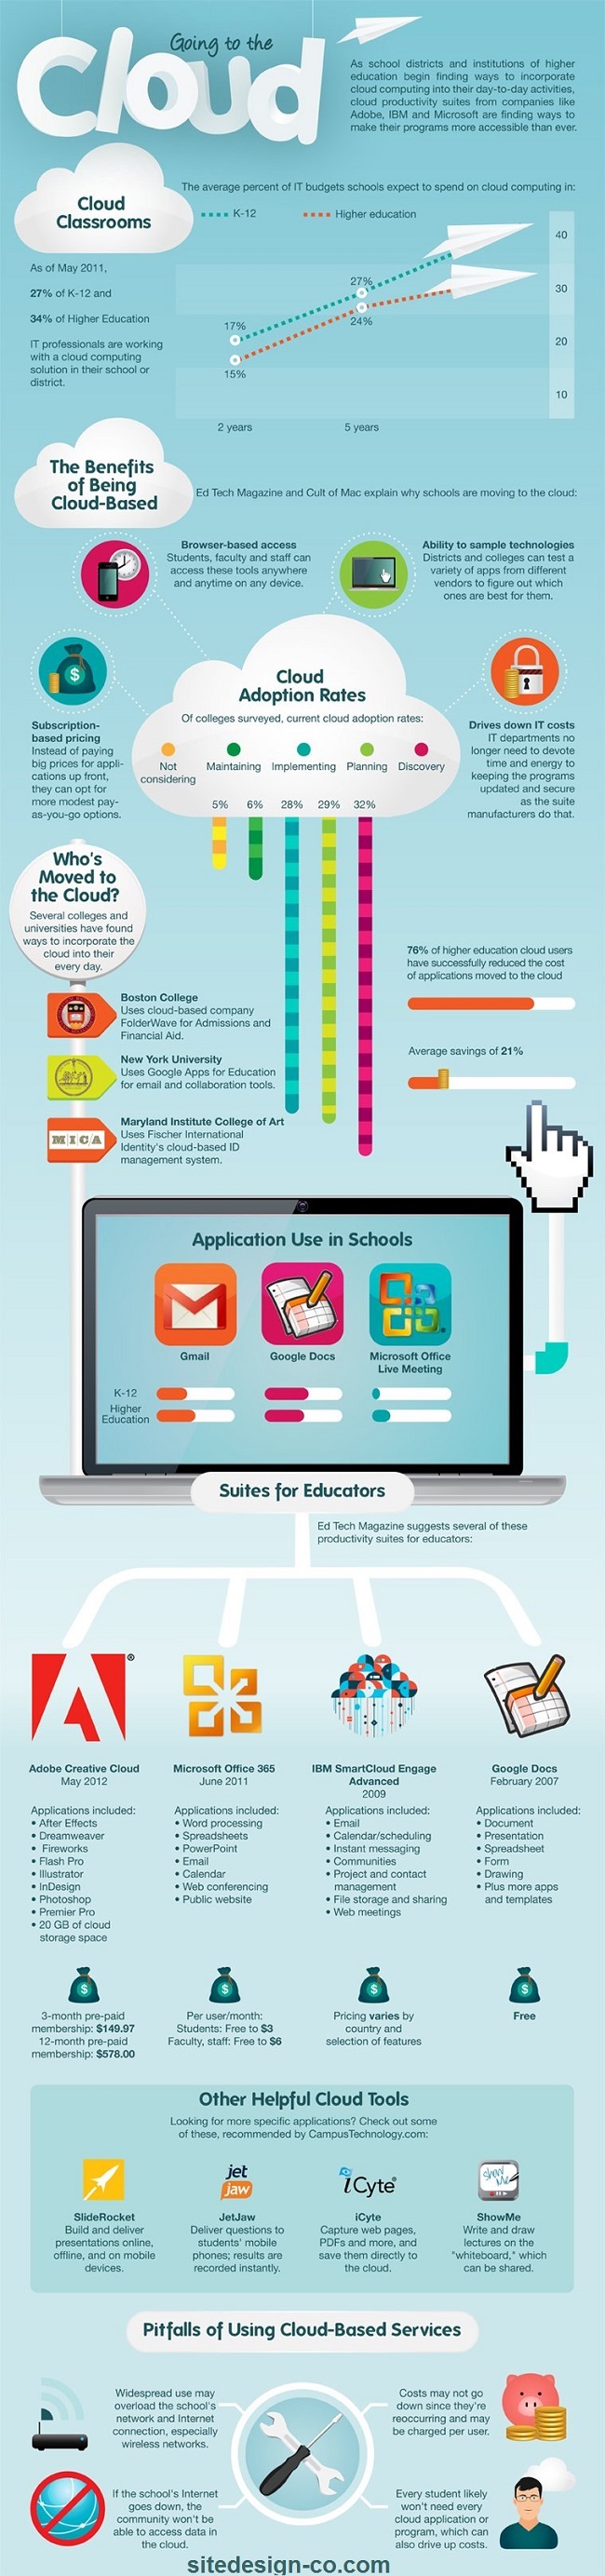 Administrator\files\UploadFile\760x3326xcolleges-cloud-computing-infographic.jpg.pagespeed.ic.tCW48wOOMP.jpg